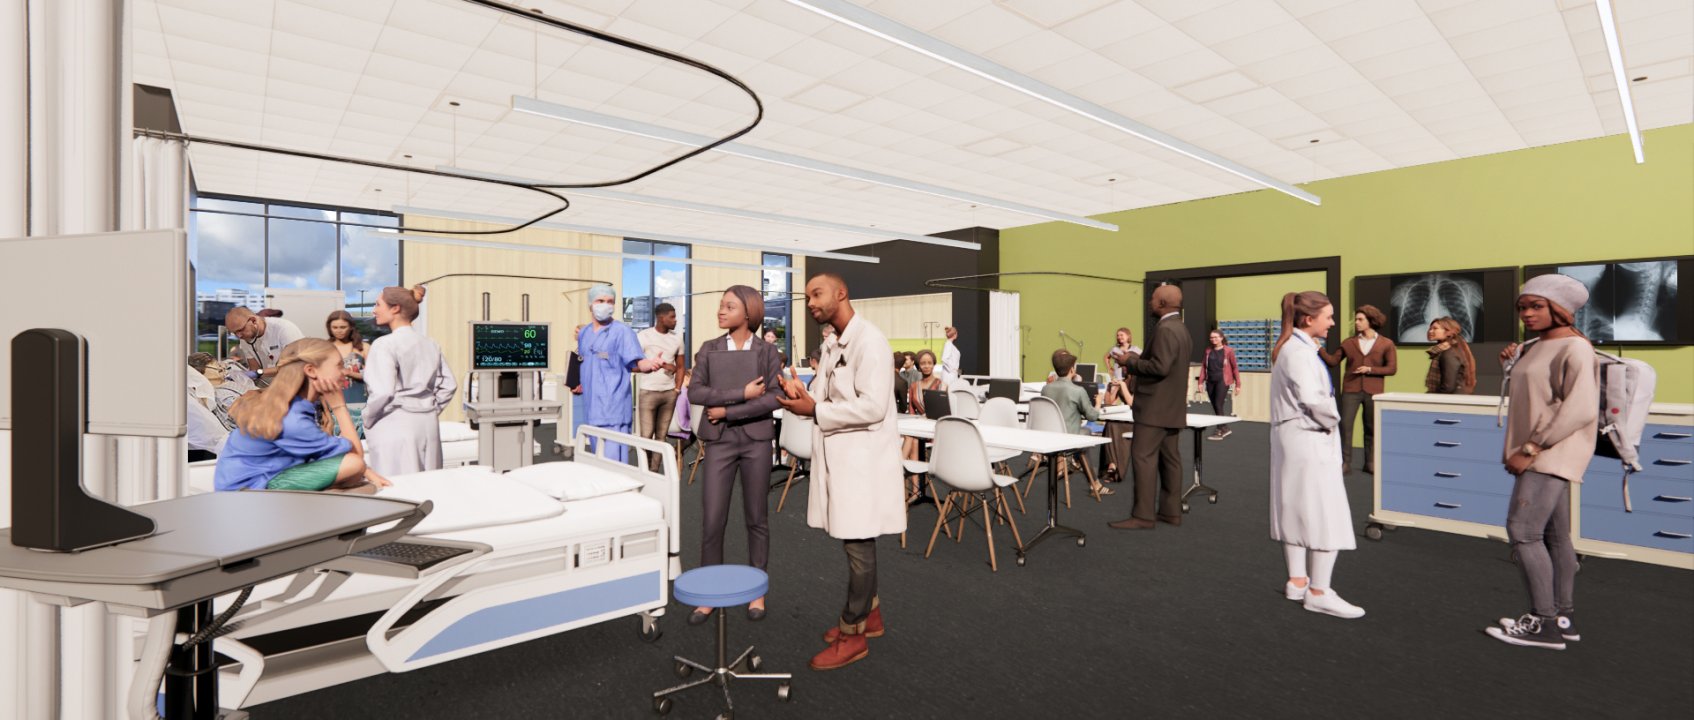 Allied Health learning lab rendering